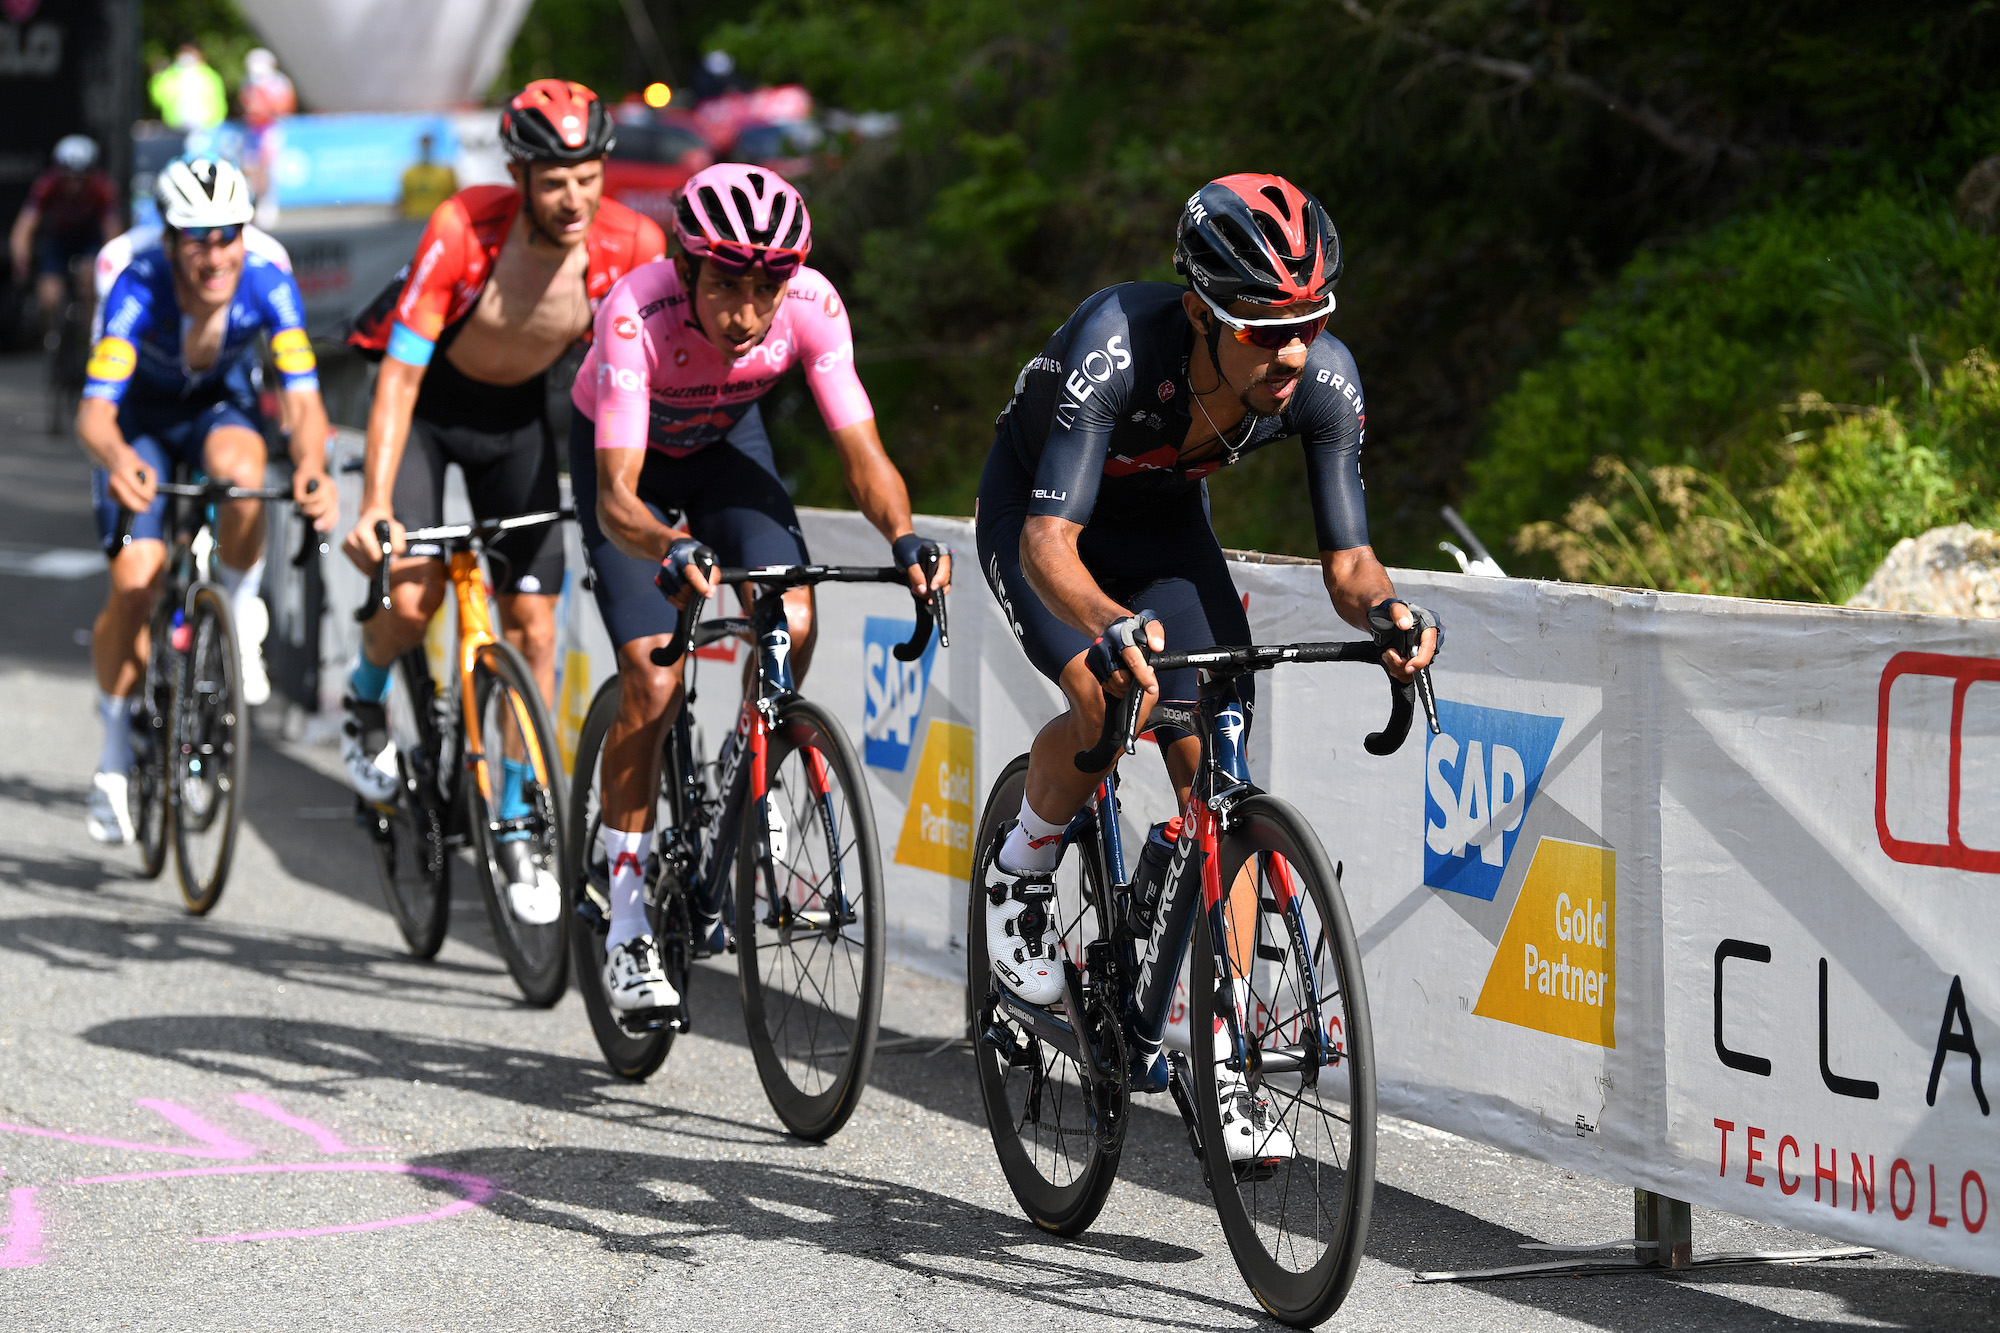 Giro d'Italia 2022 Every stage detailed for 105th edition | Weekly